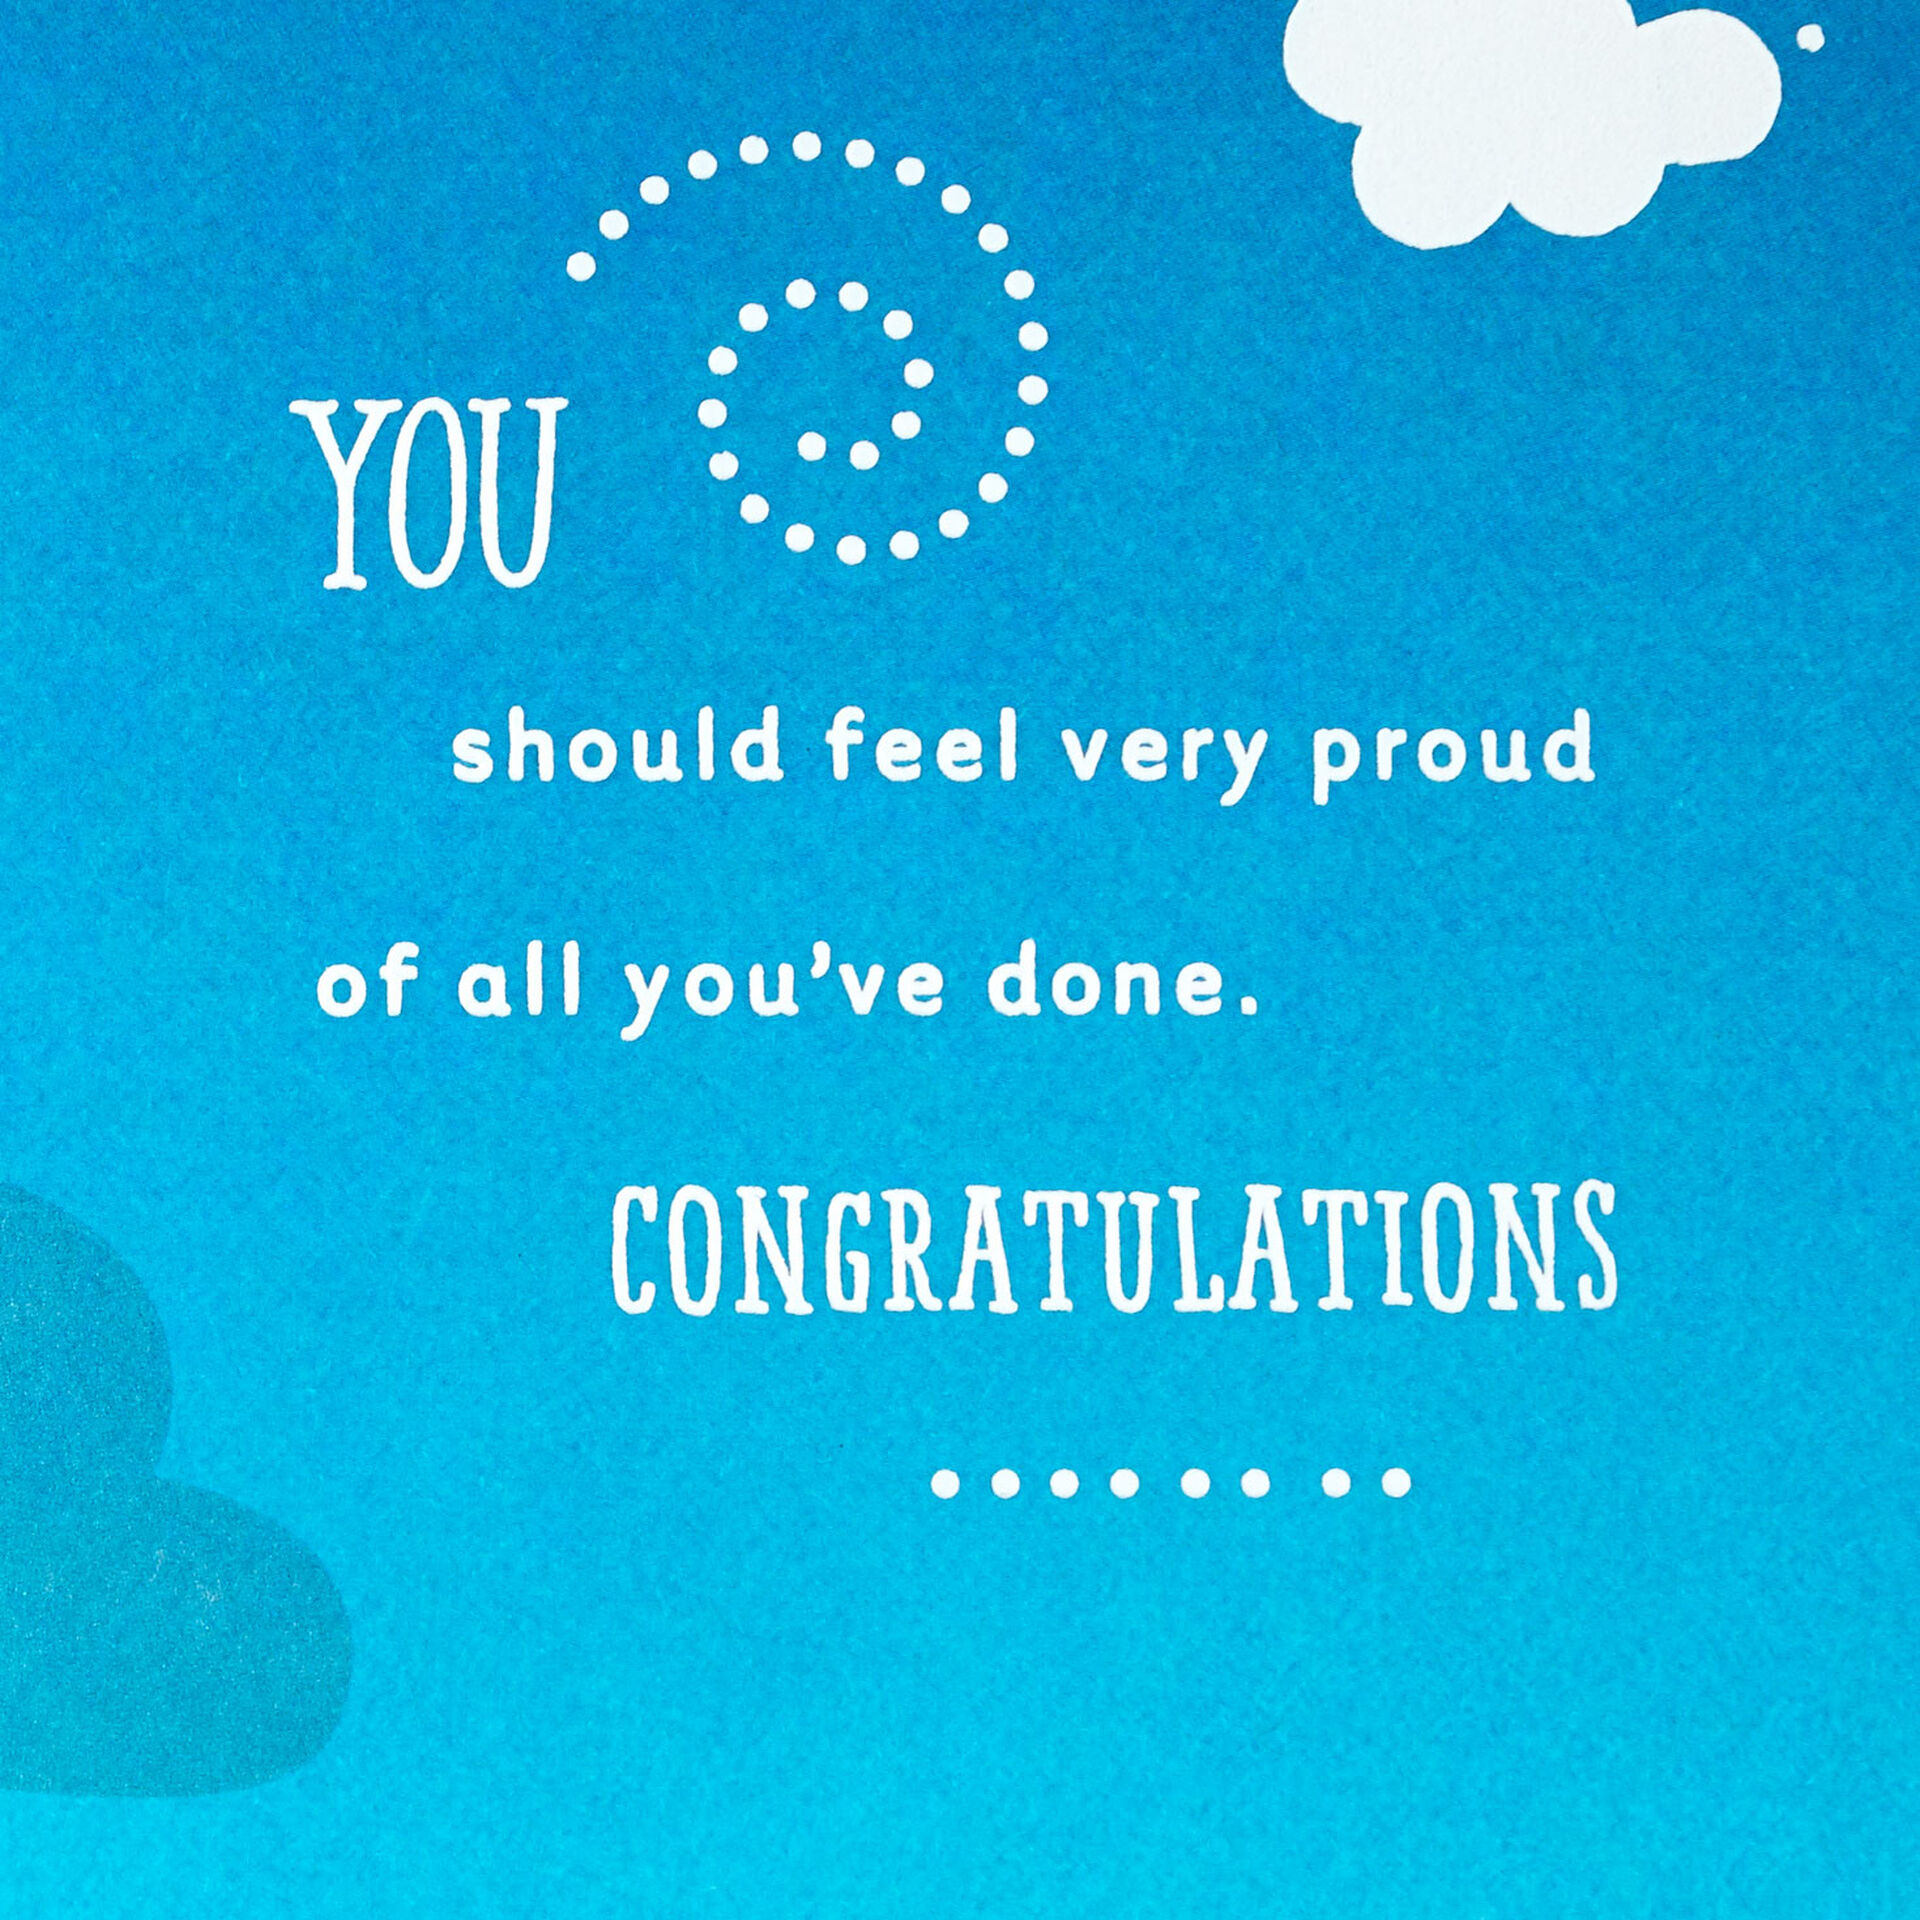 Clouds-and-Swirls-on-Blue-Congratulations-Card_399M2044_02